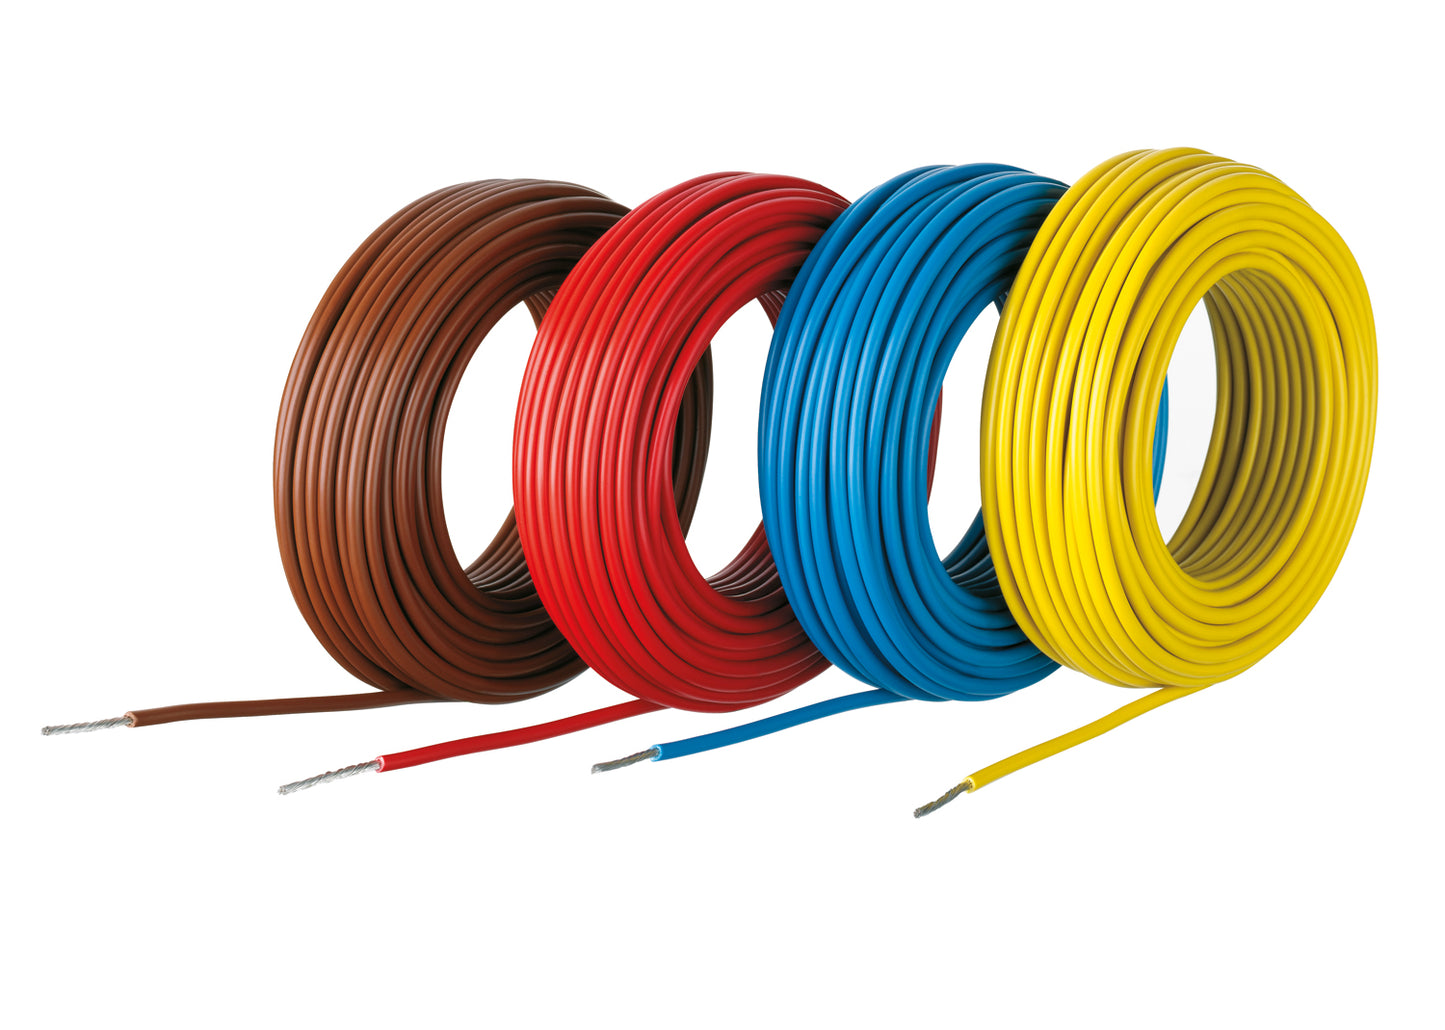 Marklin HO 71060  40 Rolls Heavy Gauge Wire 4 Colors 10 Rolls 33' . Best wire for Marklin HO and 1 gauge projects